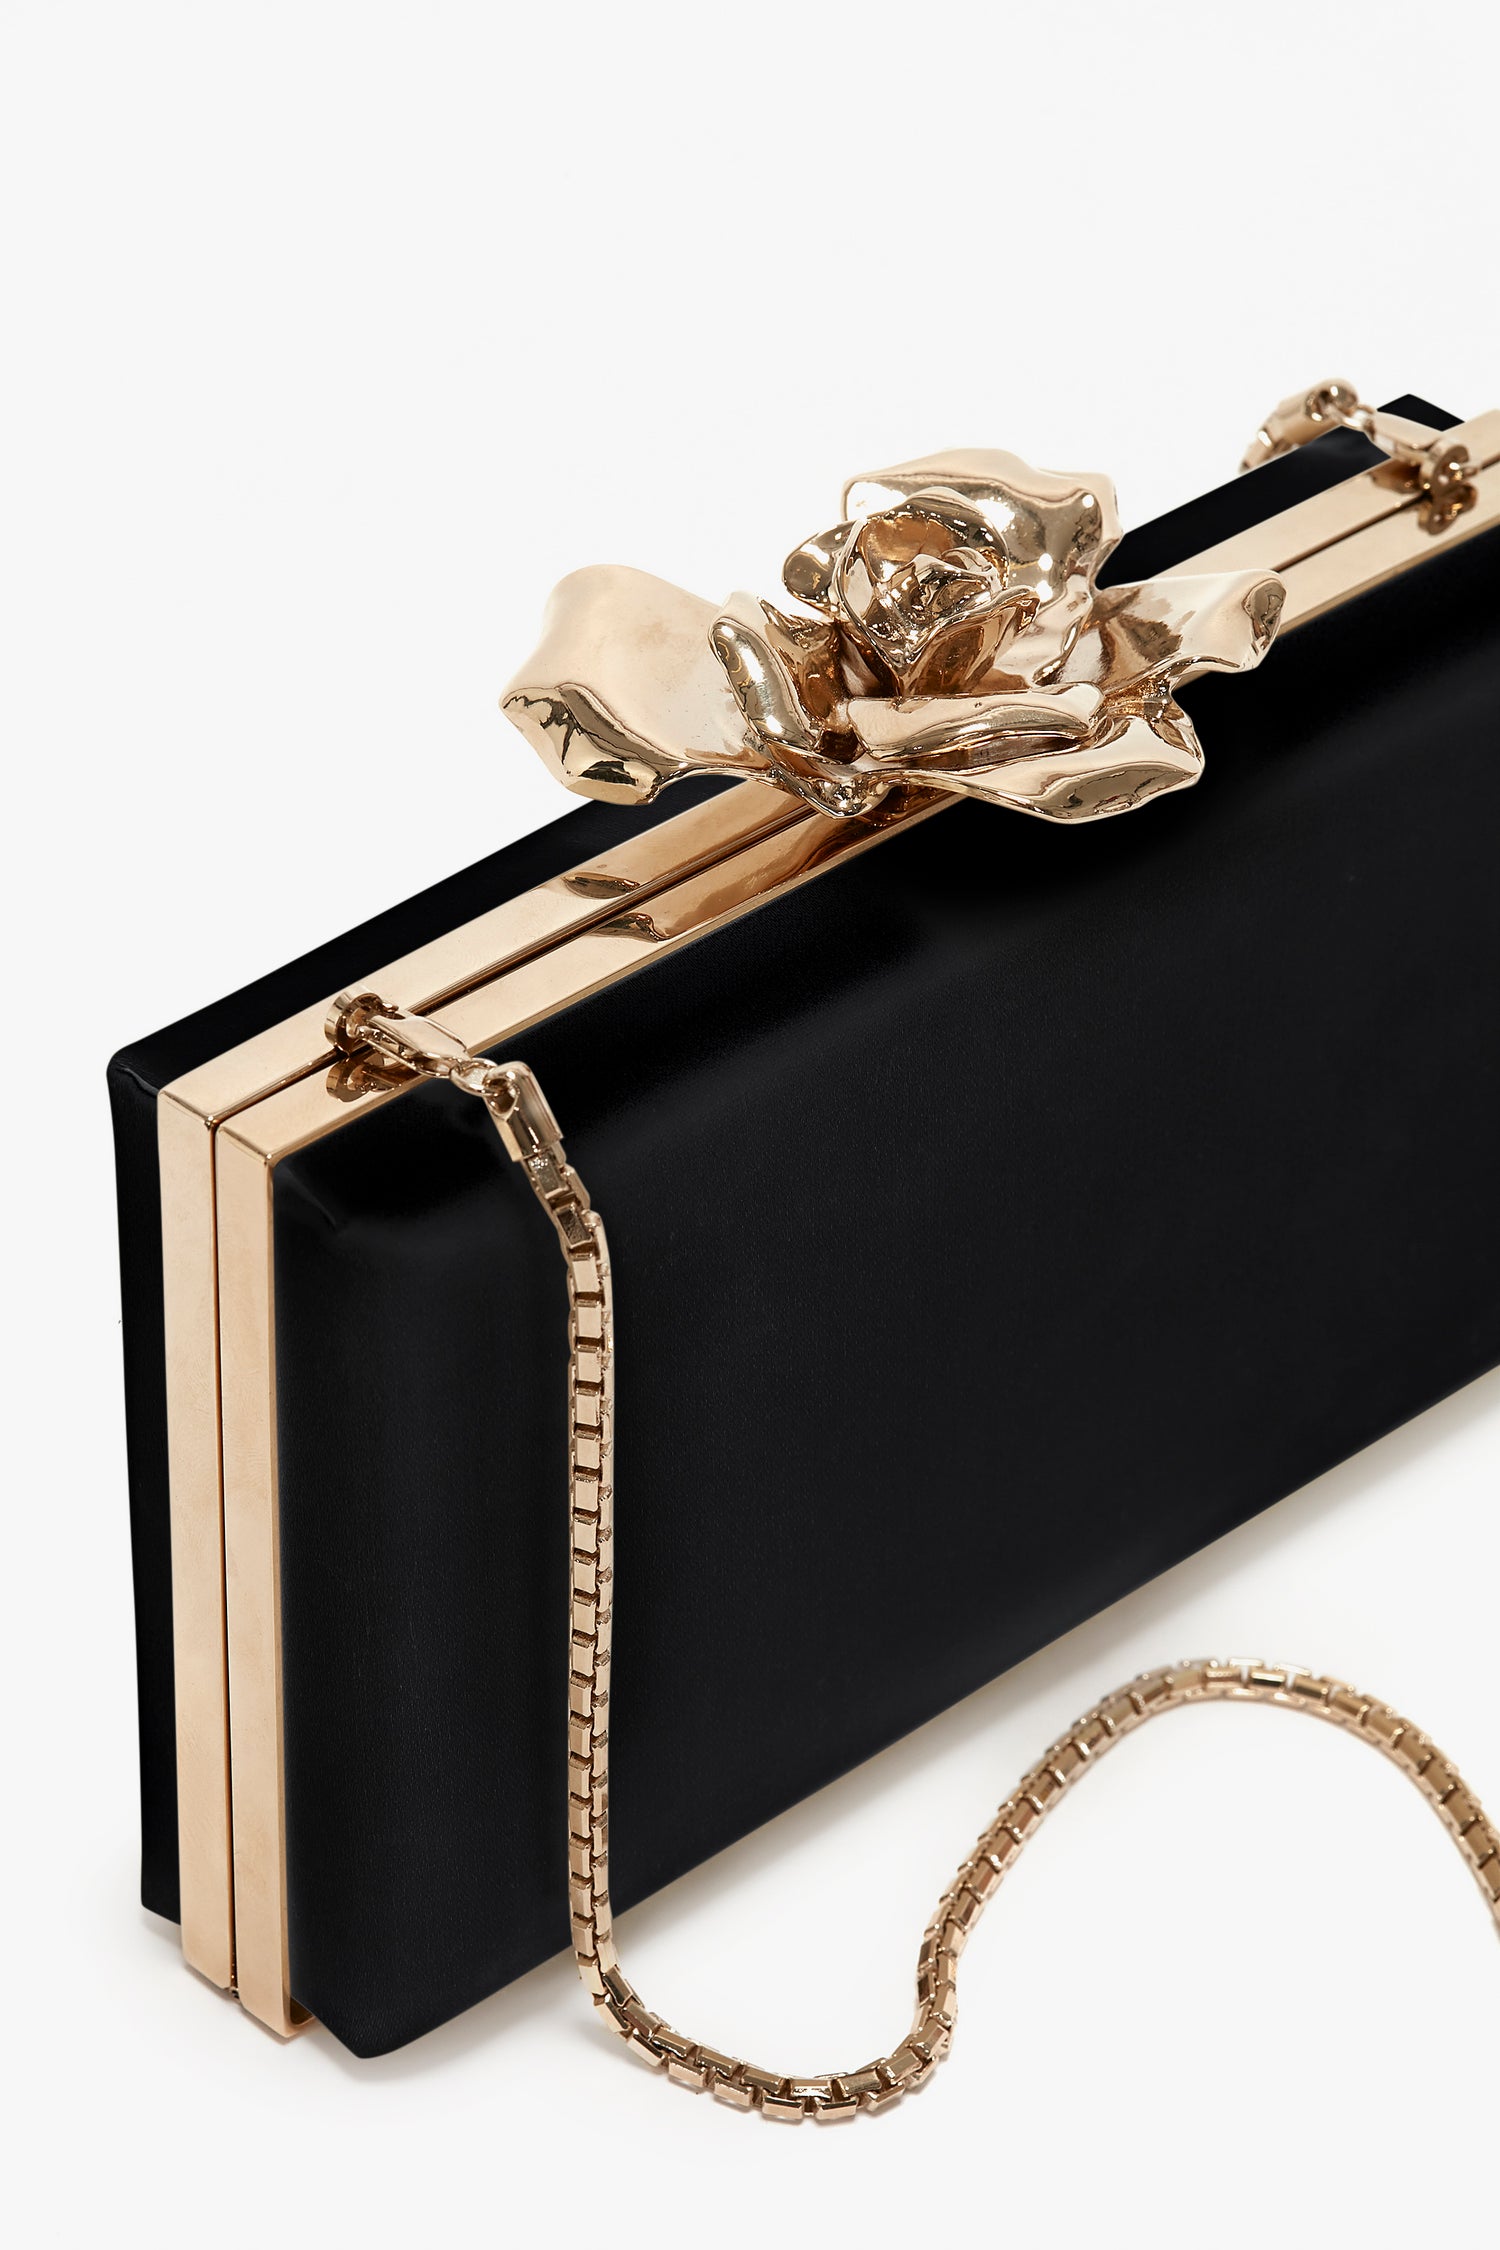 Black rectangular clutch with gold trim and a large gold floral clasp, accompanied by a thin gold chain strap, set against a white background. This hand-crafted Frame Flower Minaudiere from Victoria Beckham features a brass frame.